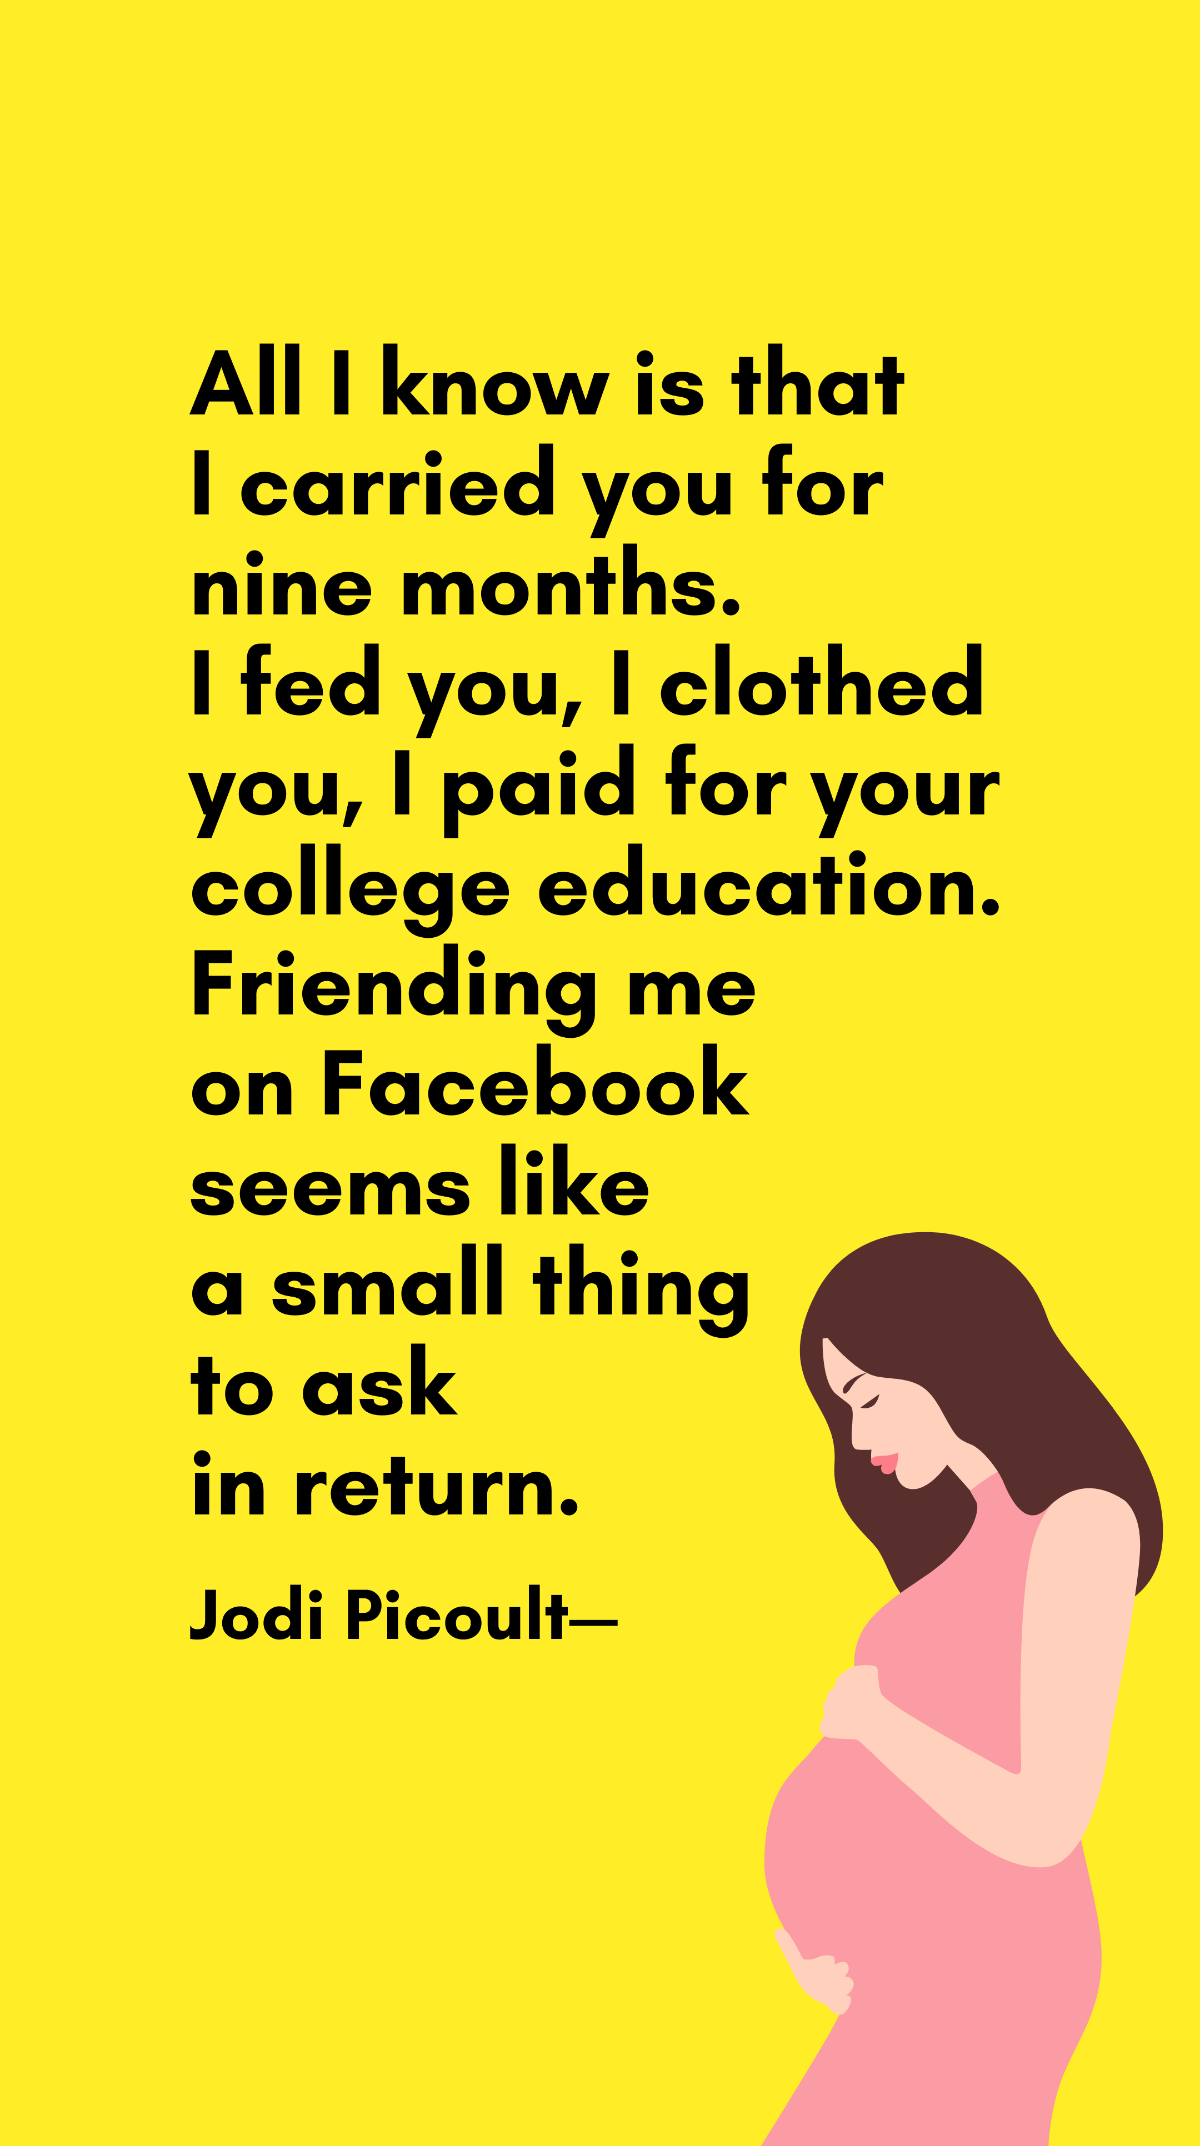 Jodi Picoult - All I know is that I carried you for nine months. I fed you, I clothed you, I paid for your college education. Friending me on Facebook seems like a small thing to ask in return. Templa